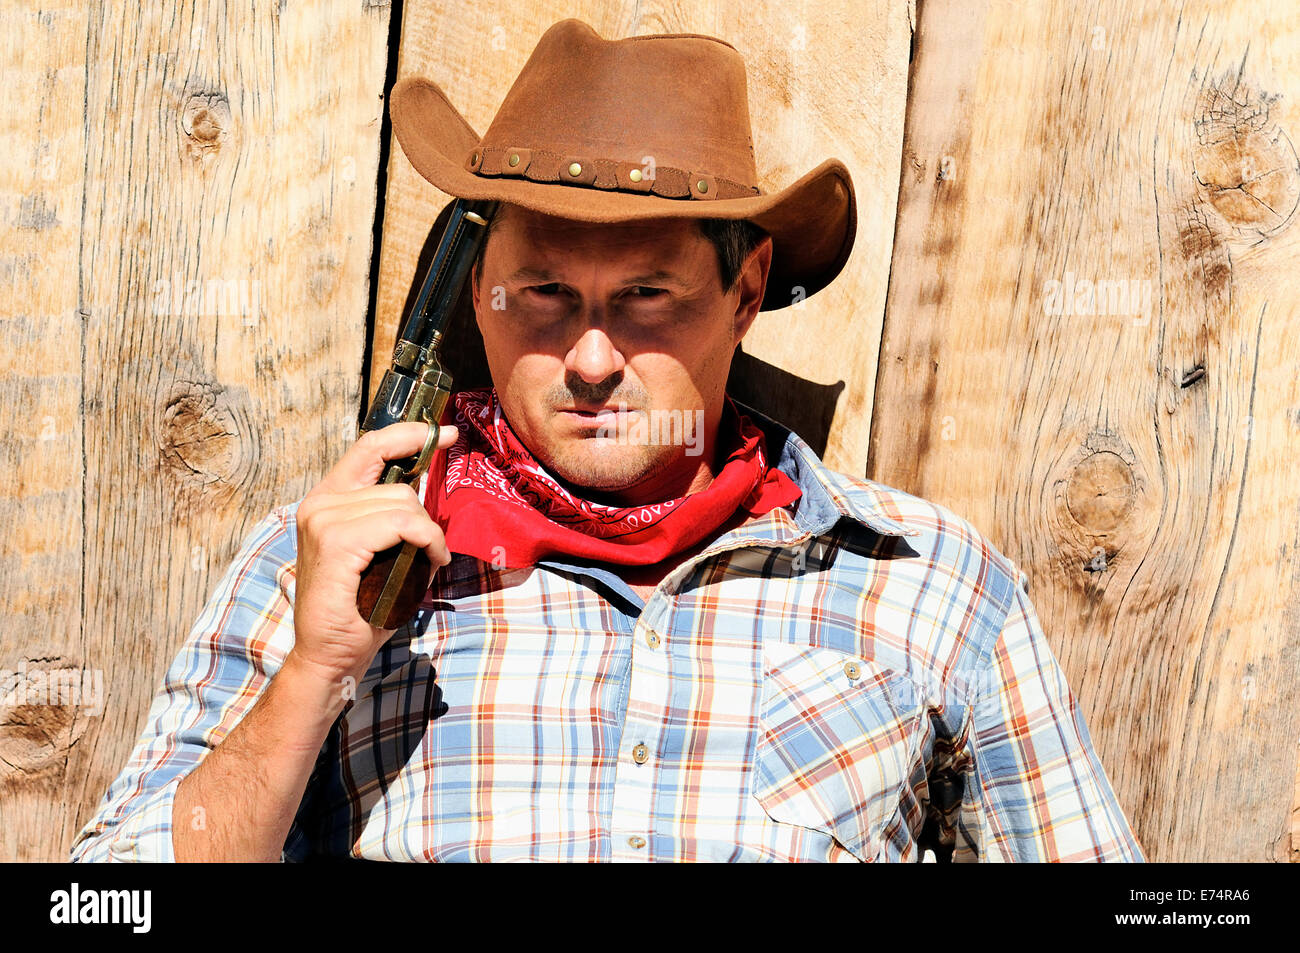 OUT WEST - A cowboy takes time to rest and reflect. Stock Photo